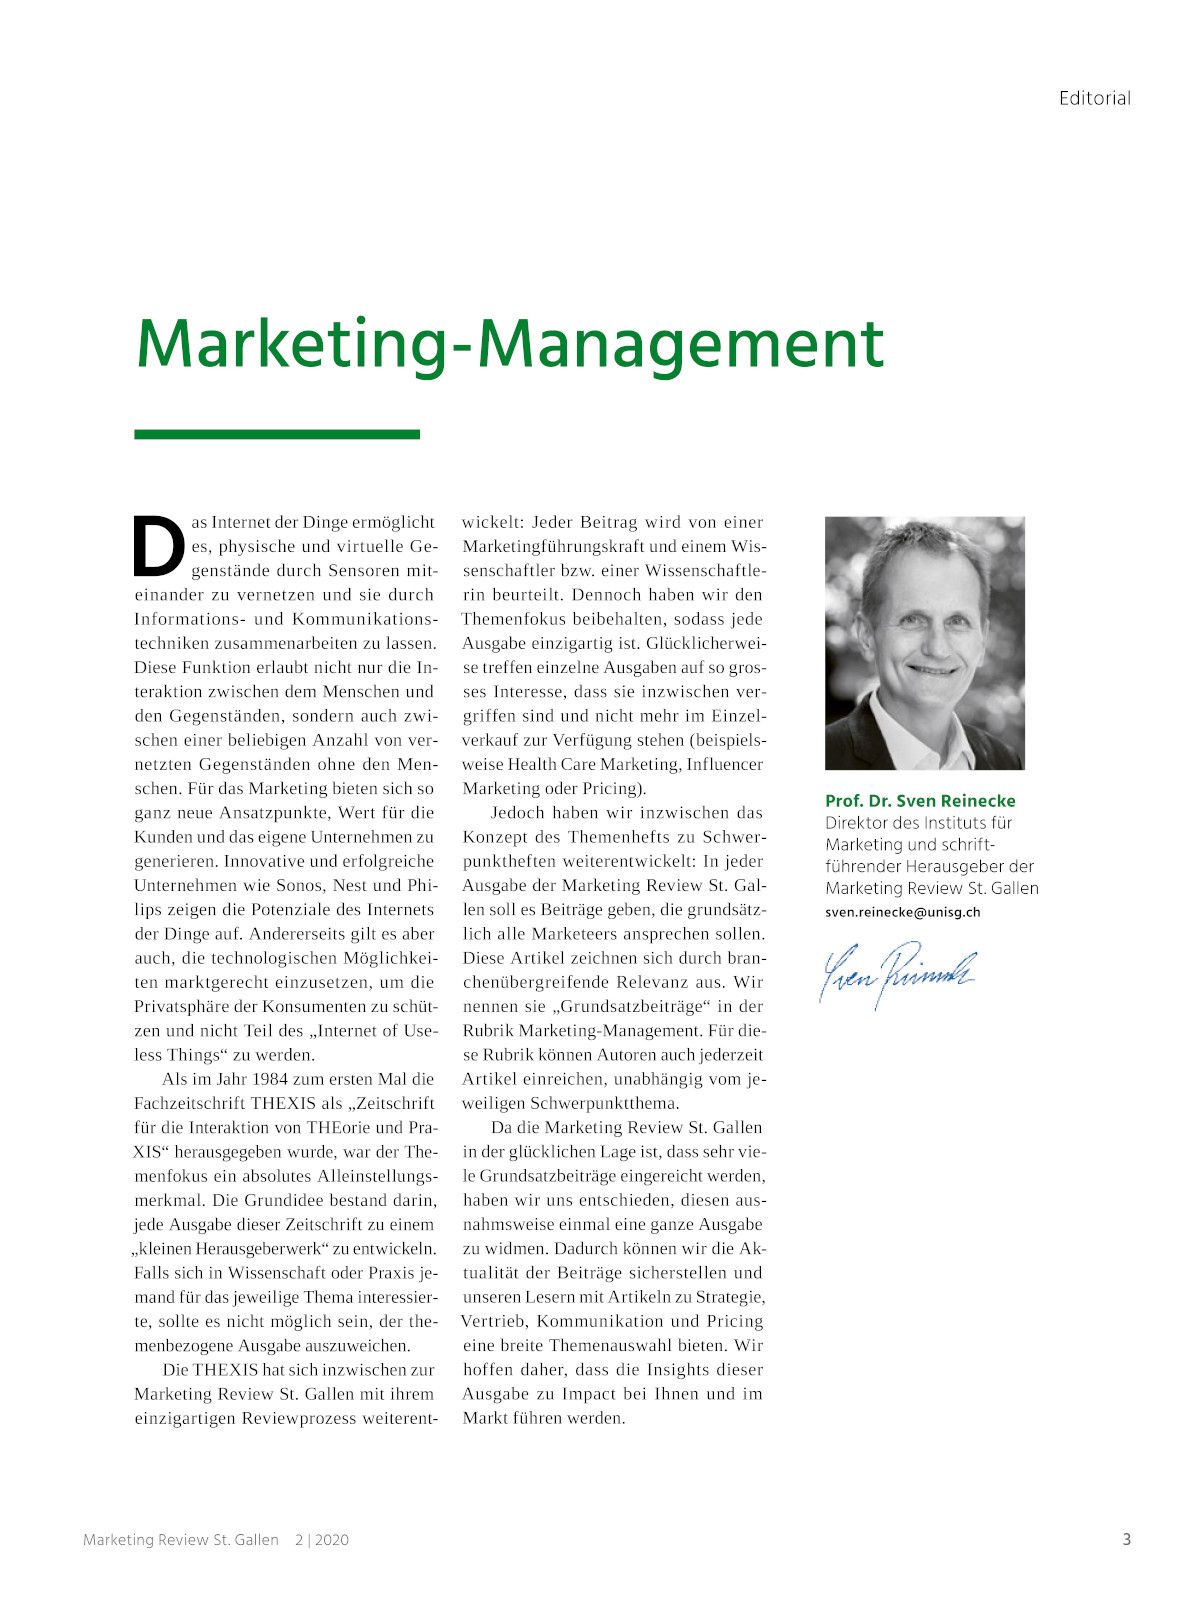 Marketing Review 2-2020 Editorial